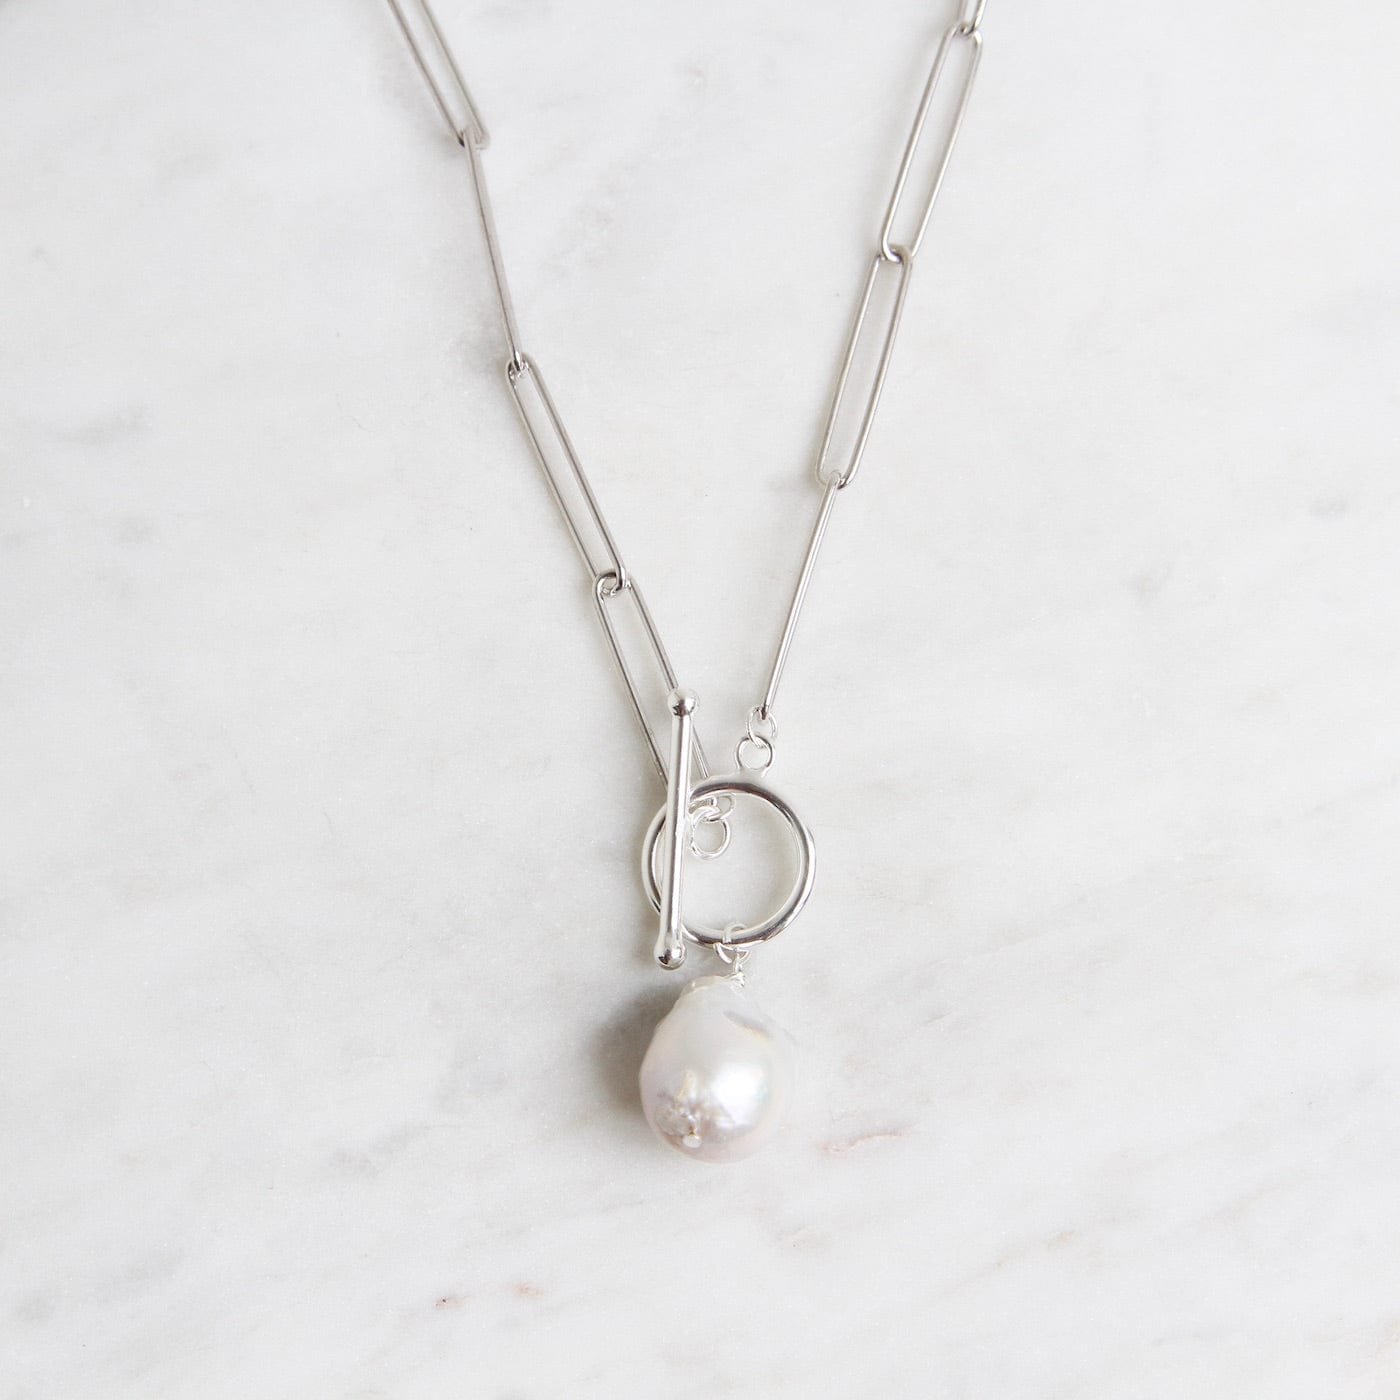 NKL Savannah Pearl Necklace - Sterling Silver